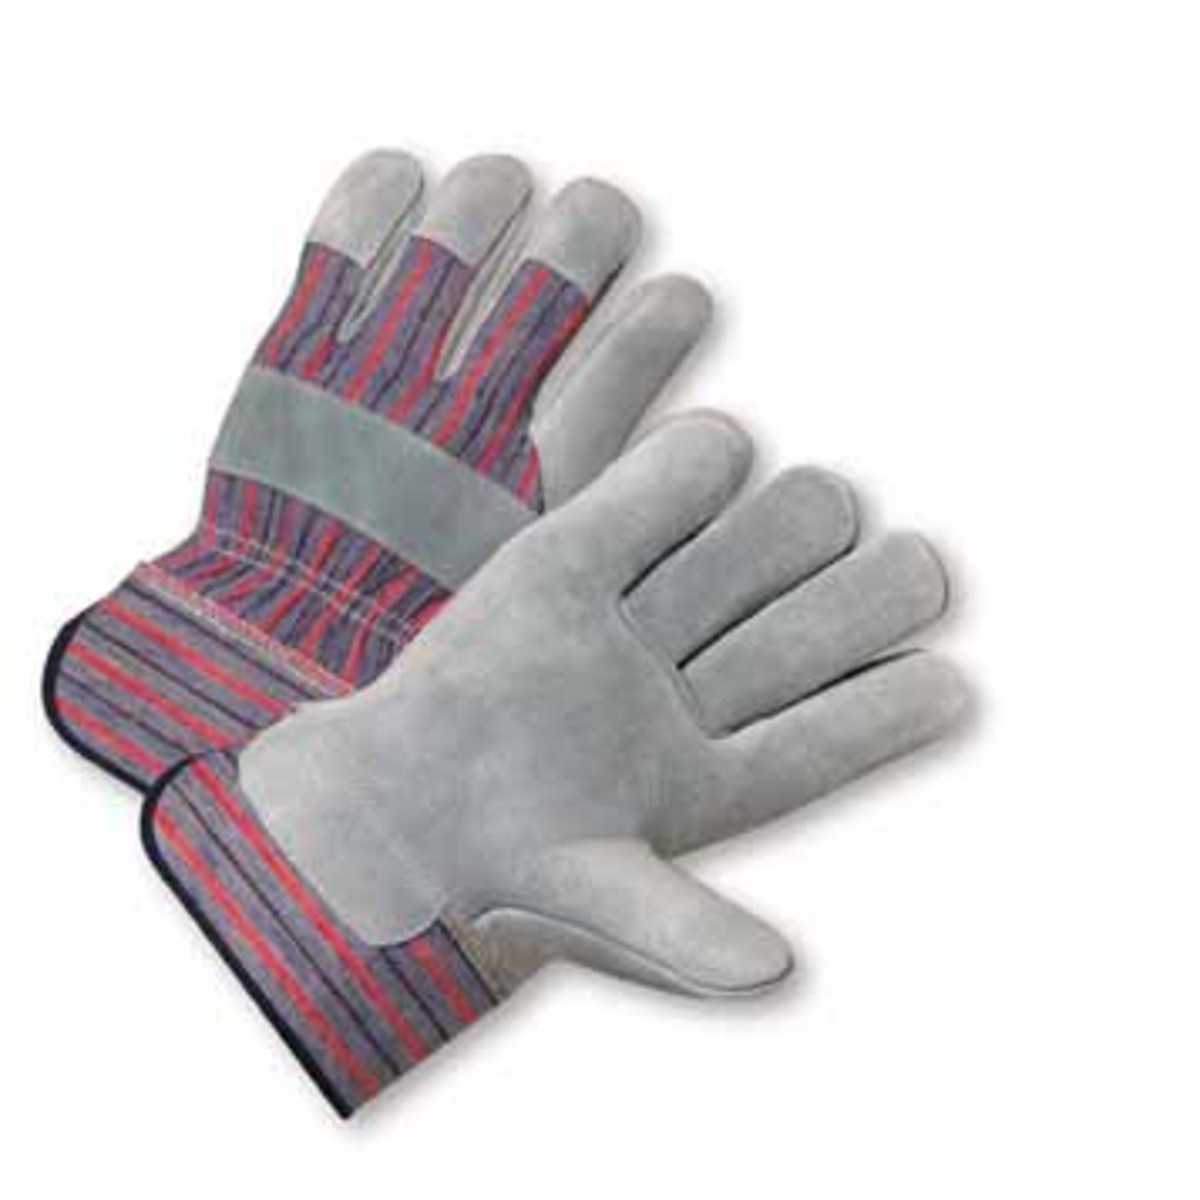 PIP® 2X Standard Split Leather Palm Gloves With Canvas Back And Rubberized Safety Cuff